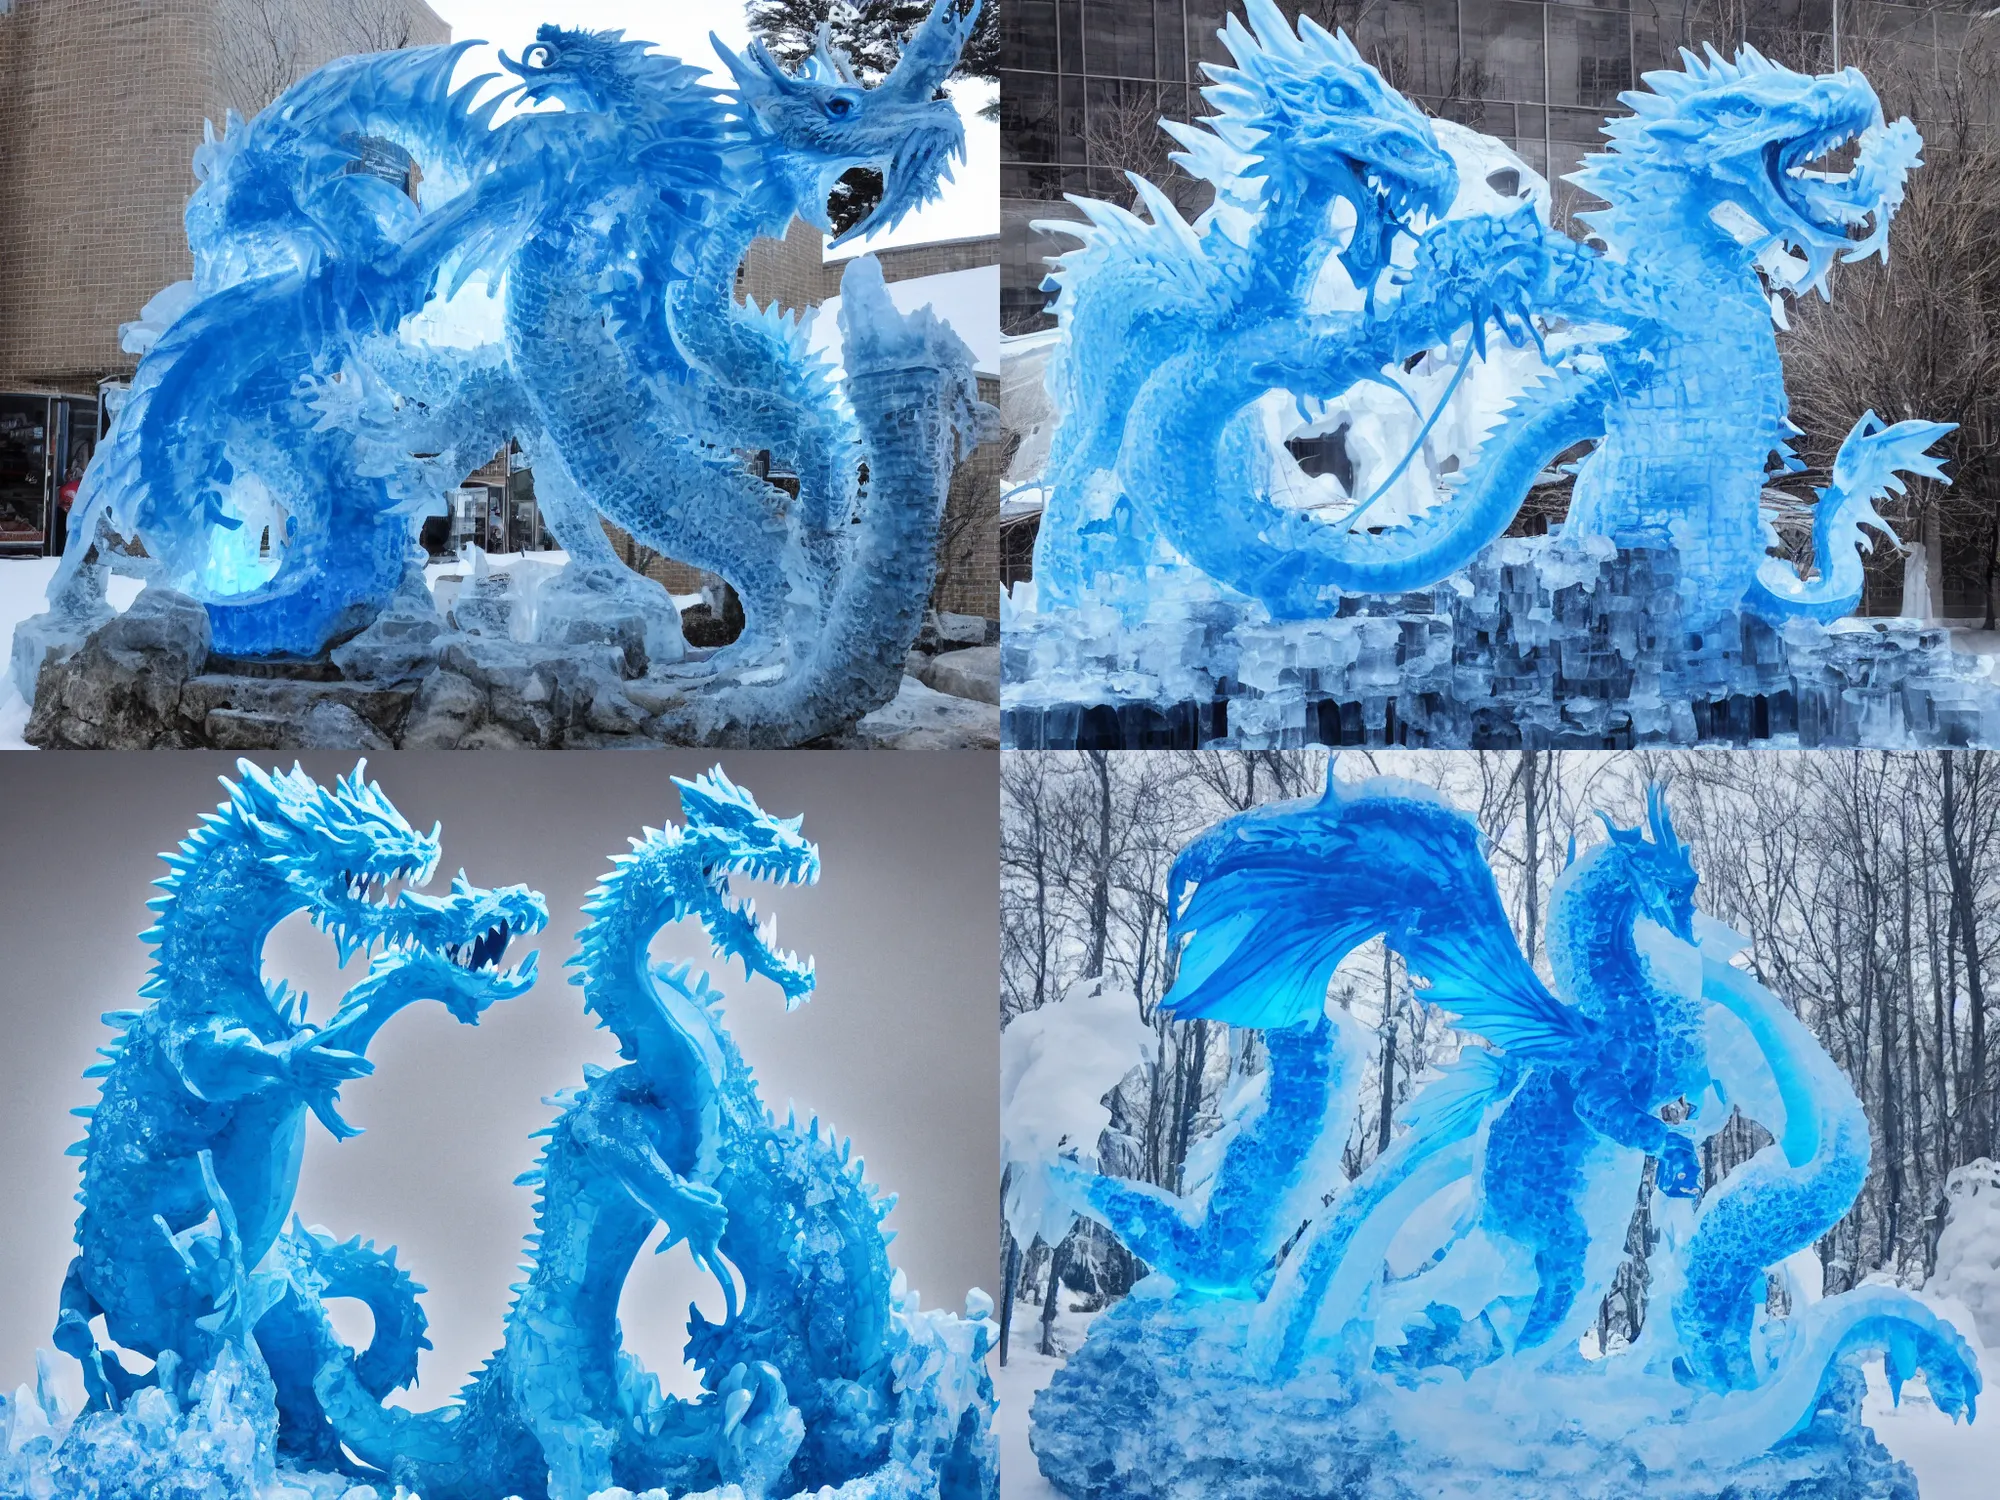 Prompt: A blue ice sculpture of a dragon breathing fire.